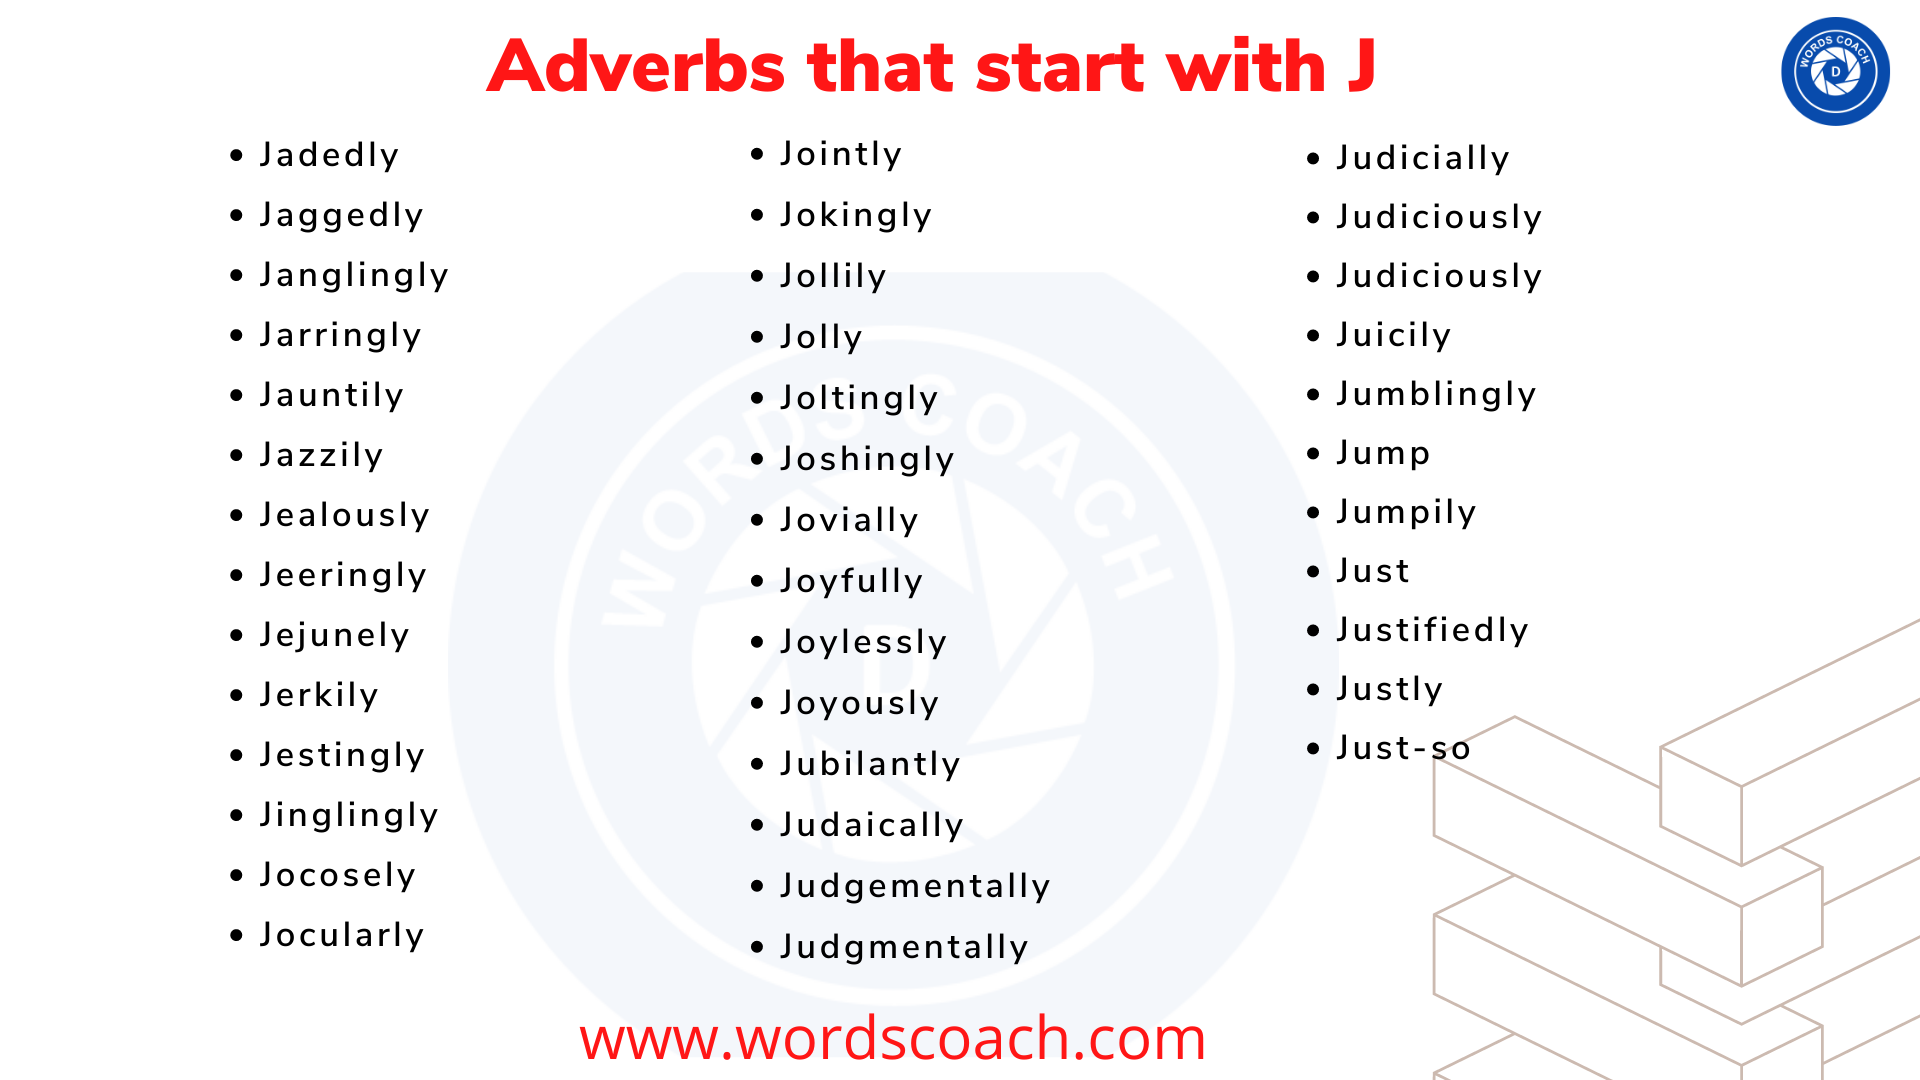 Adverbs that start with J- wordscoach.com